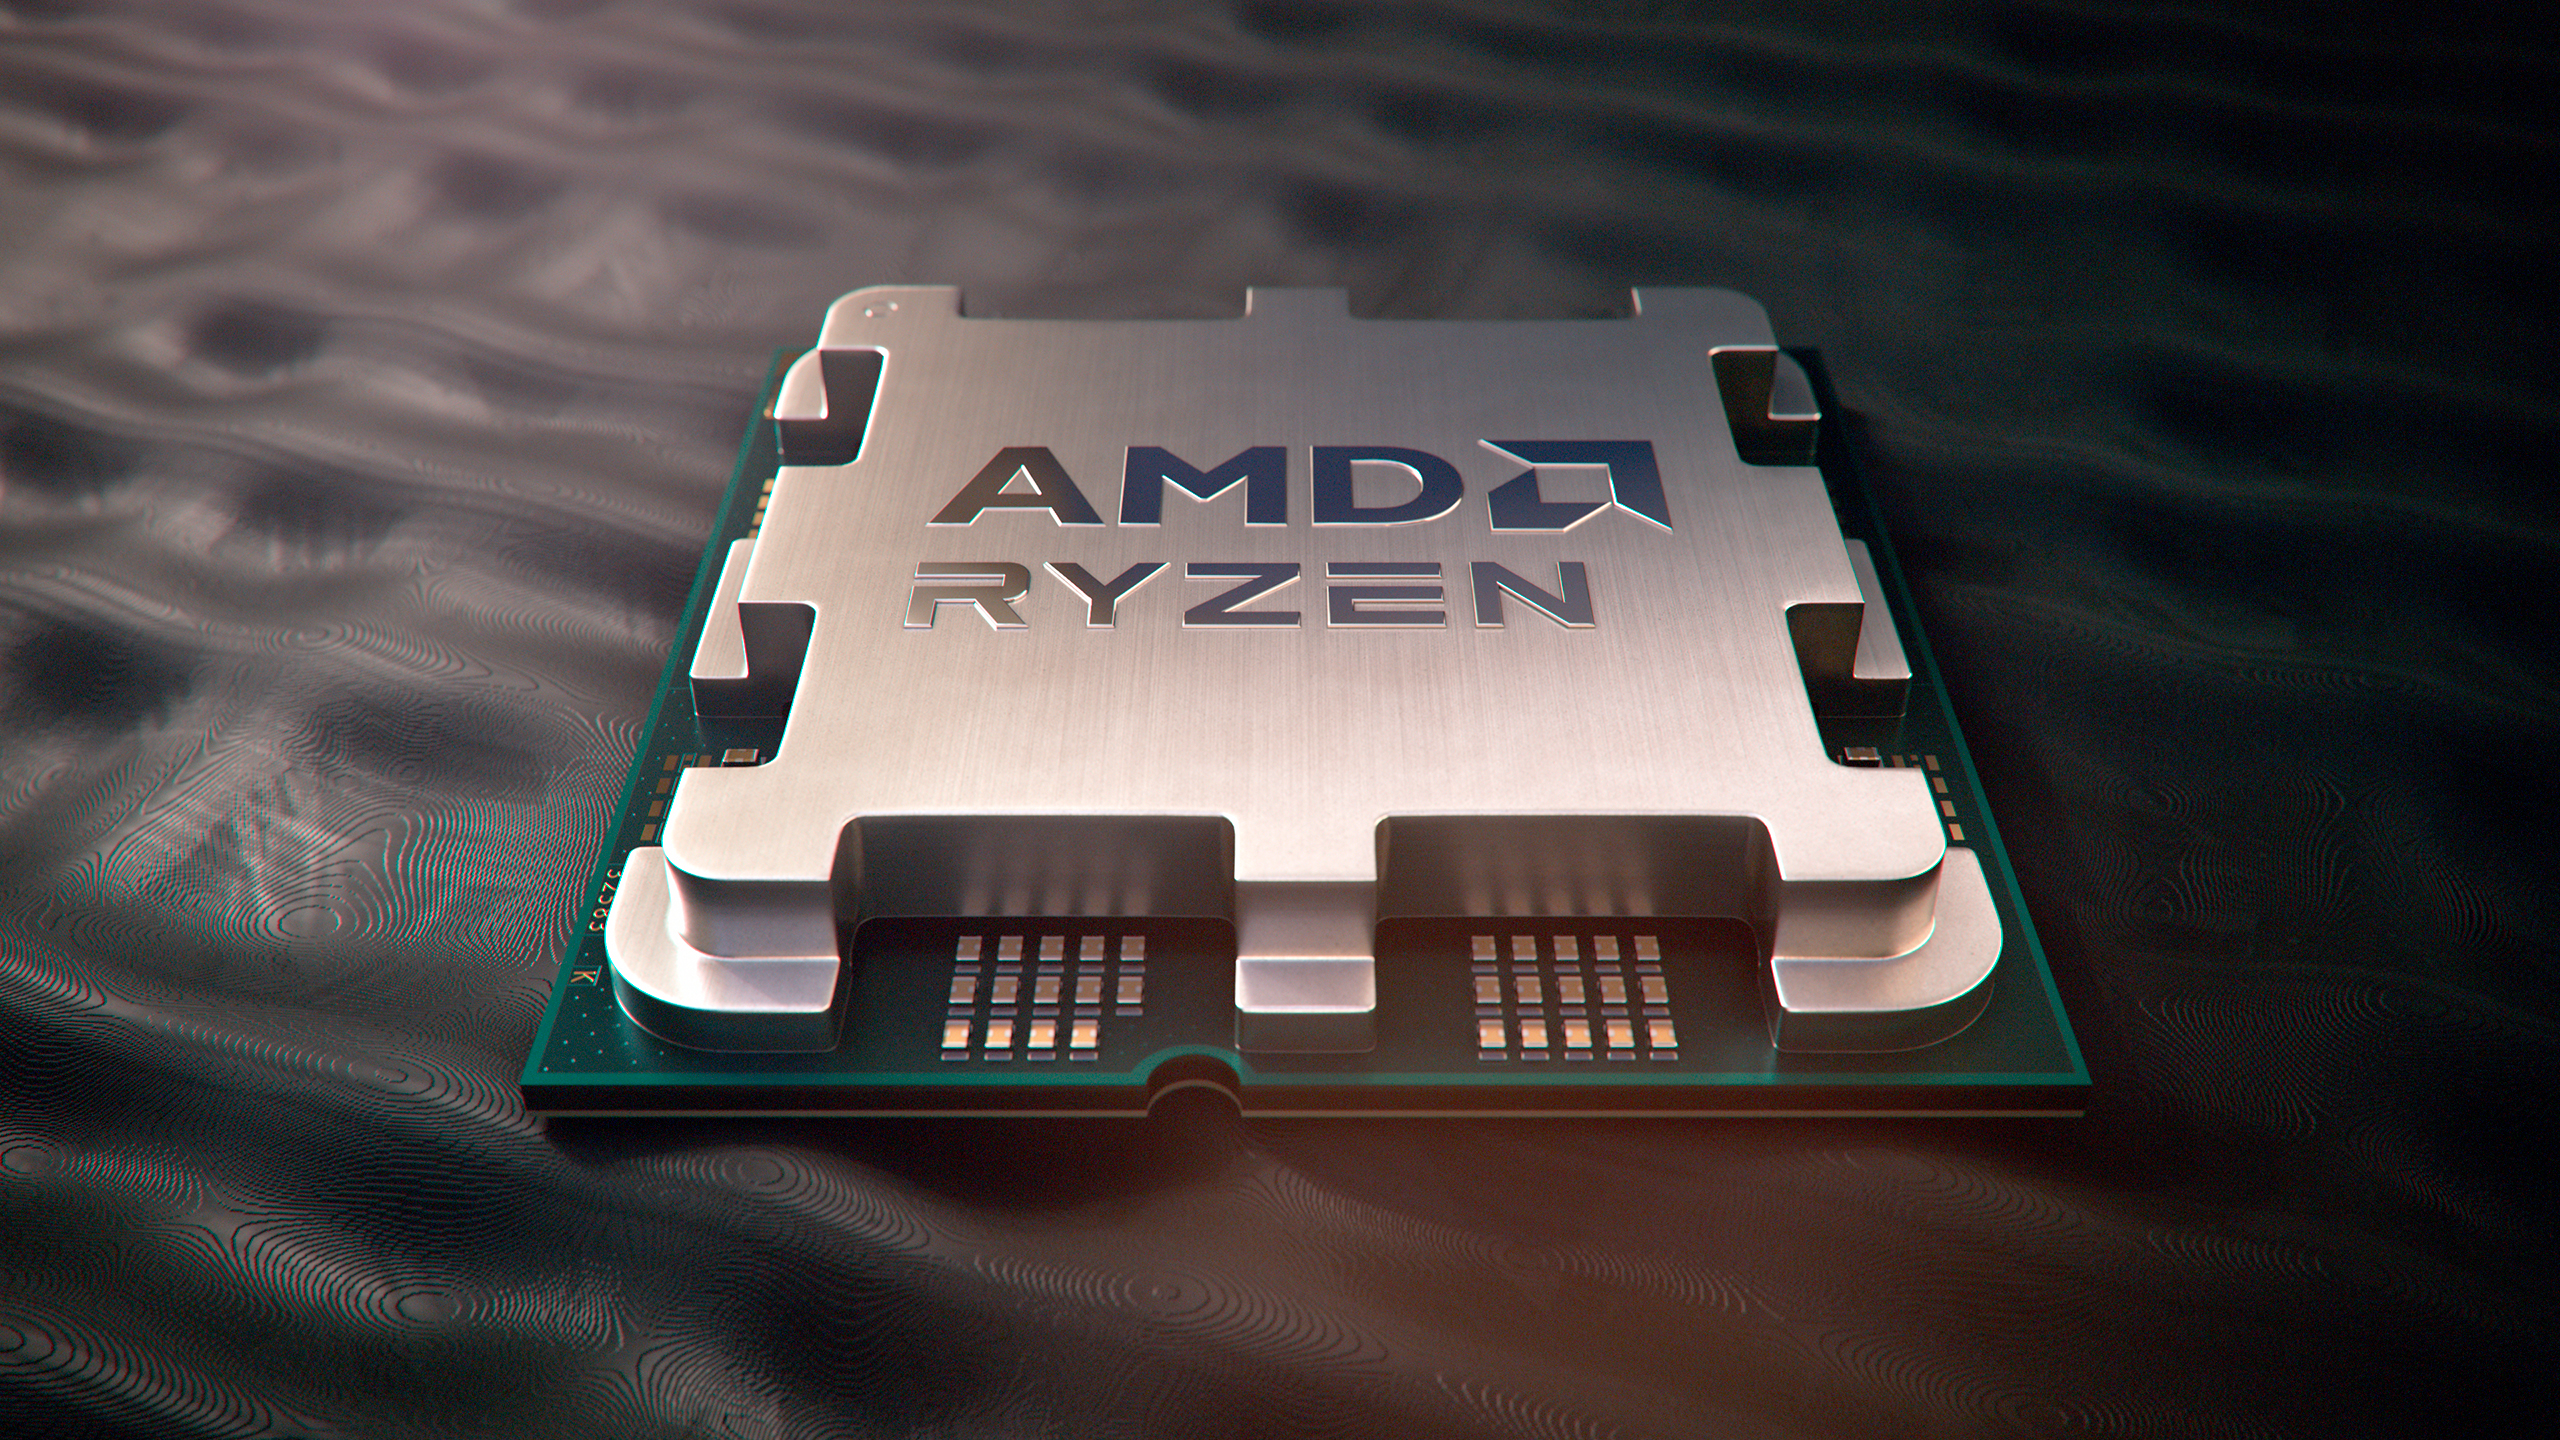 AMD Ryzen 5 7500F 6-Core CPU Breaks Cover For Budget AM5 Gaming Builds